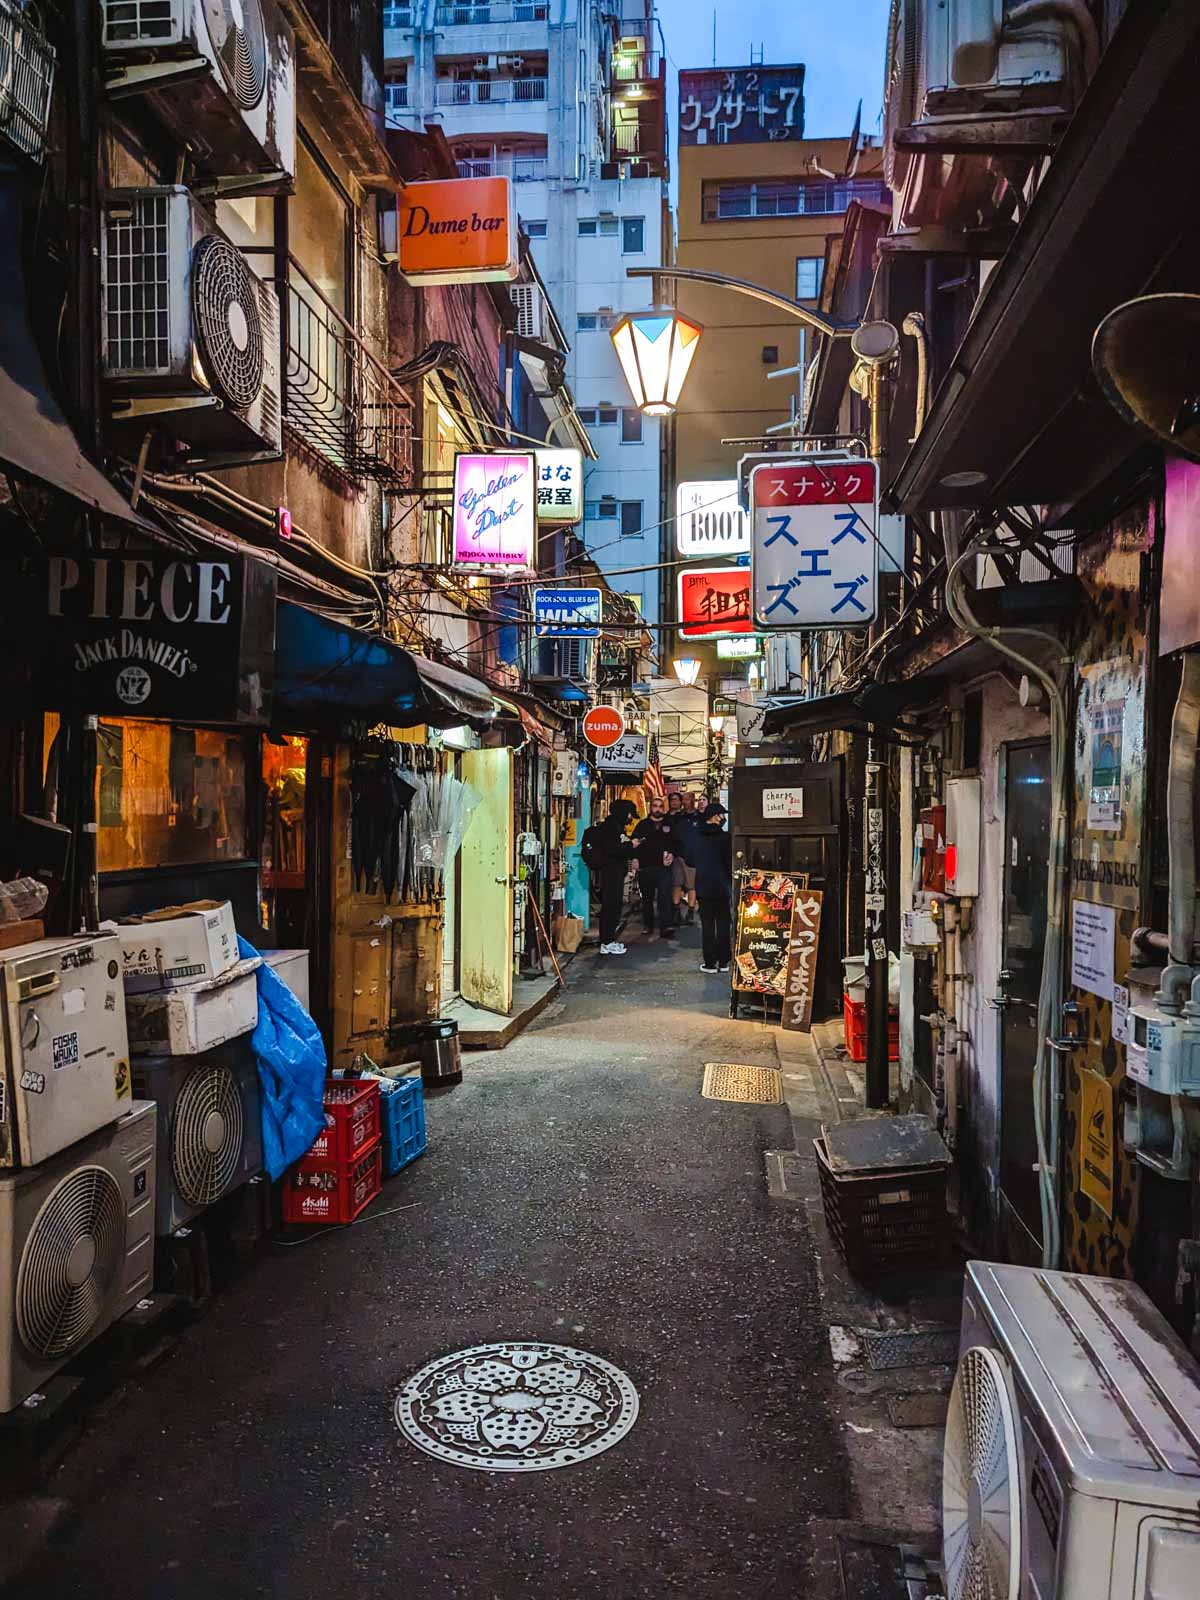 Dark alley of Golden Gai Tokyo lined with air conditioners and bar signs.